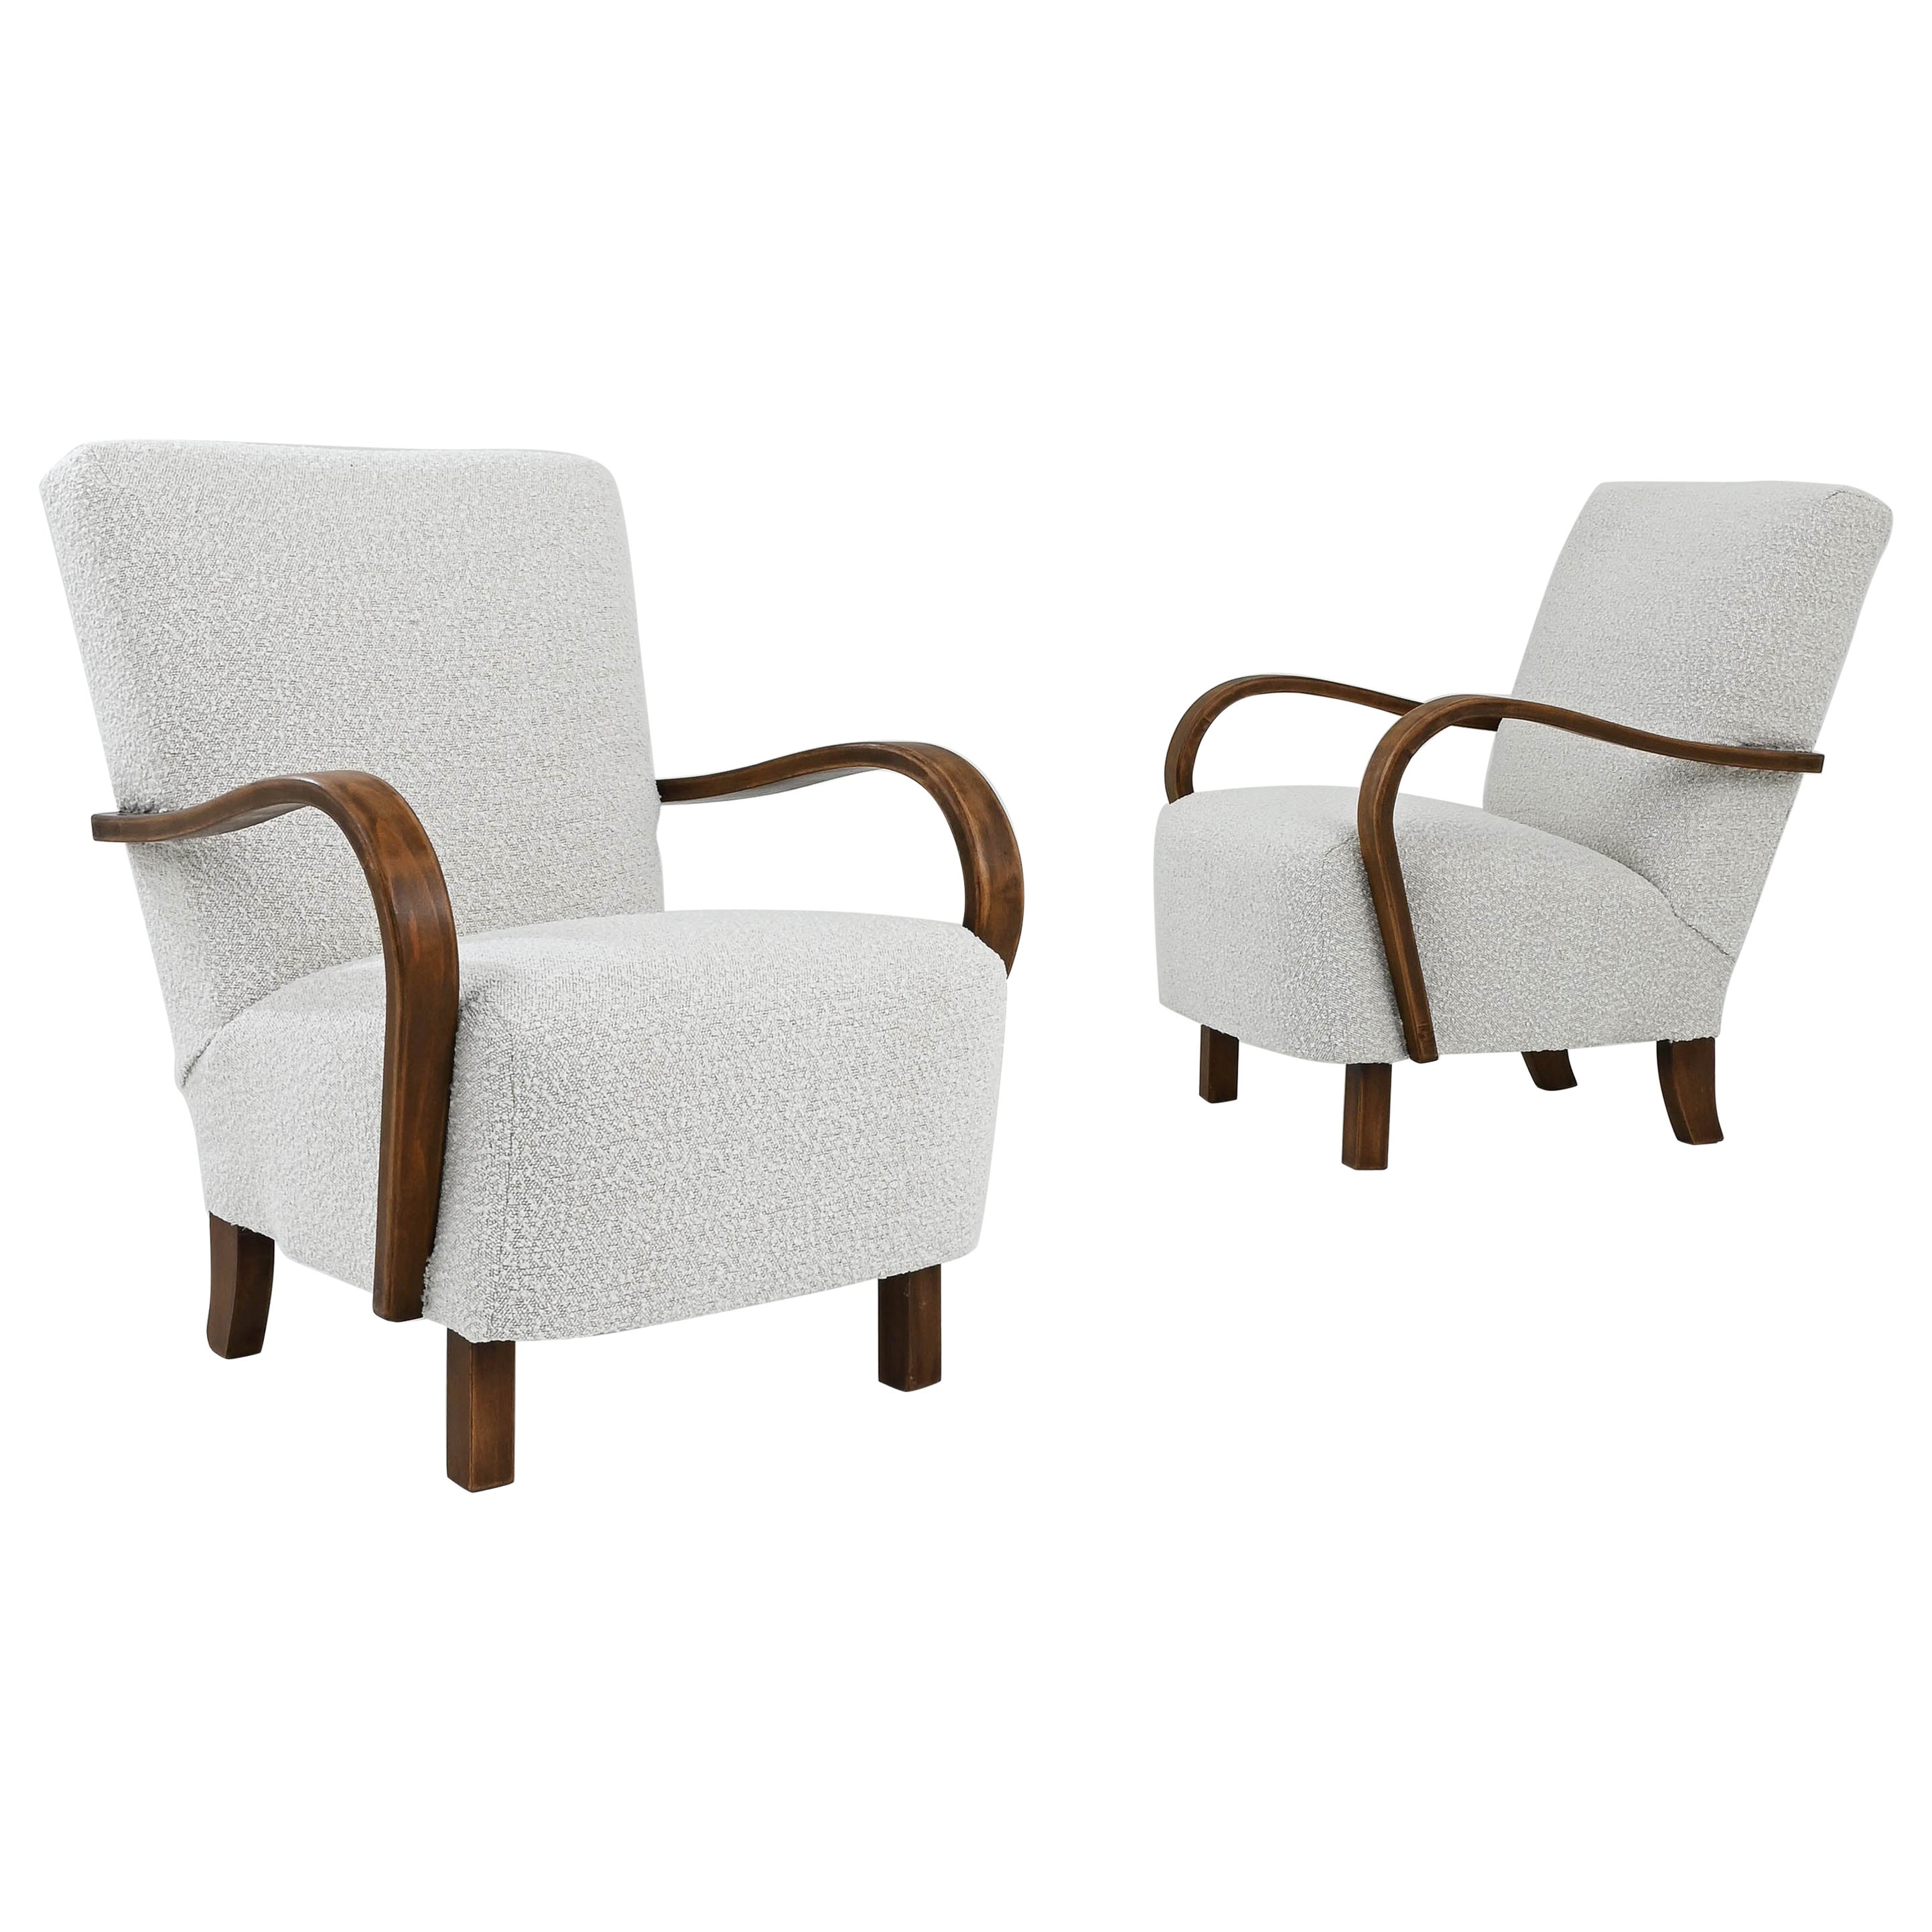 Pair of 1930s Czech Upholstered Armchairs by J. Halabala